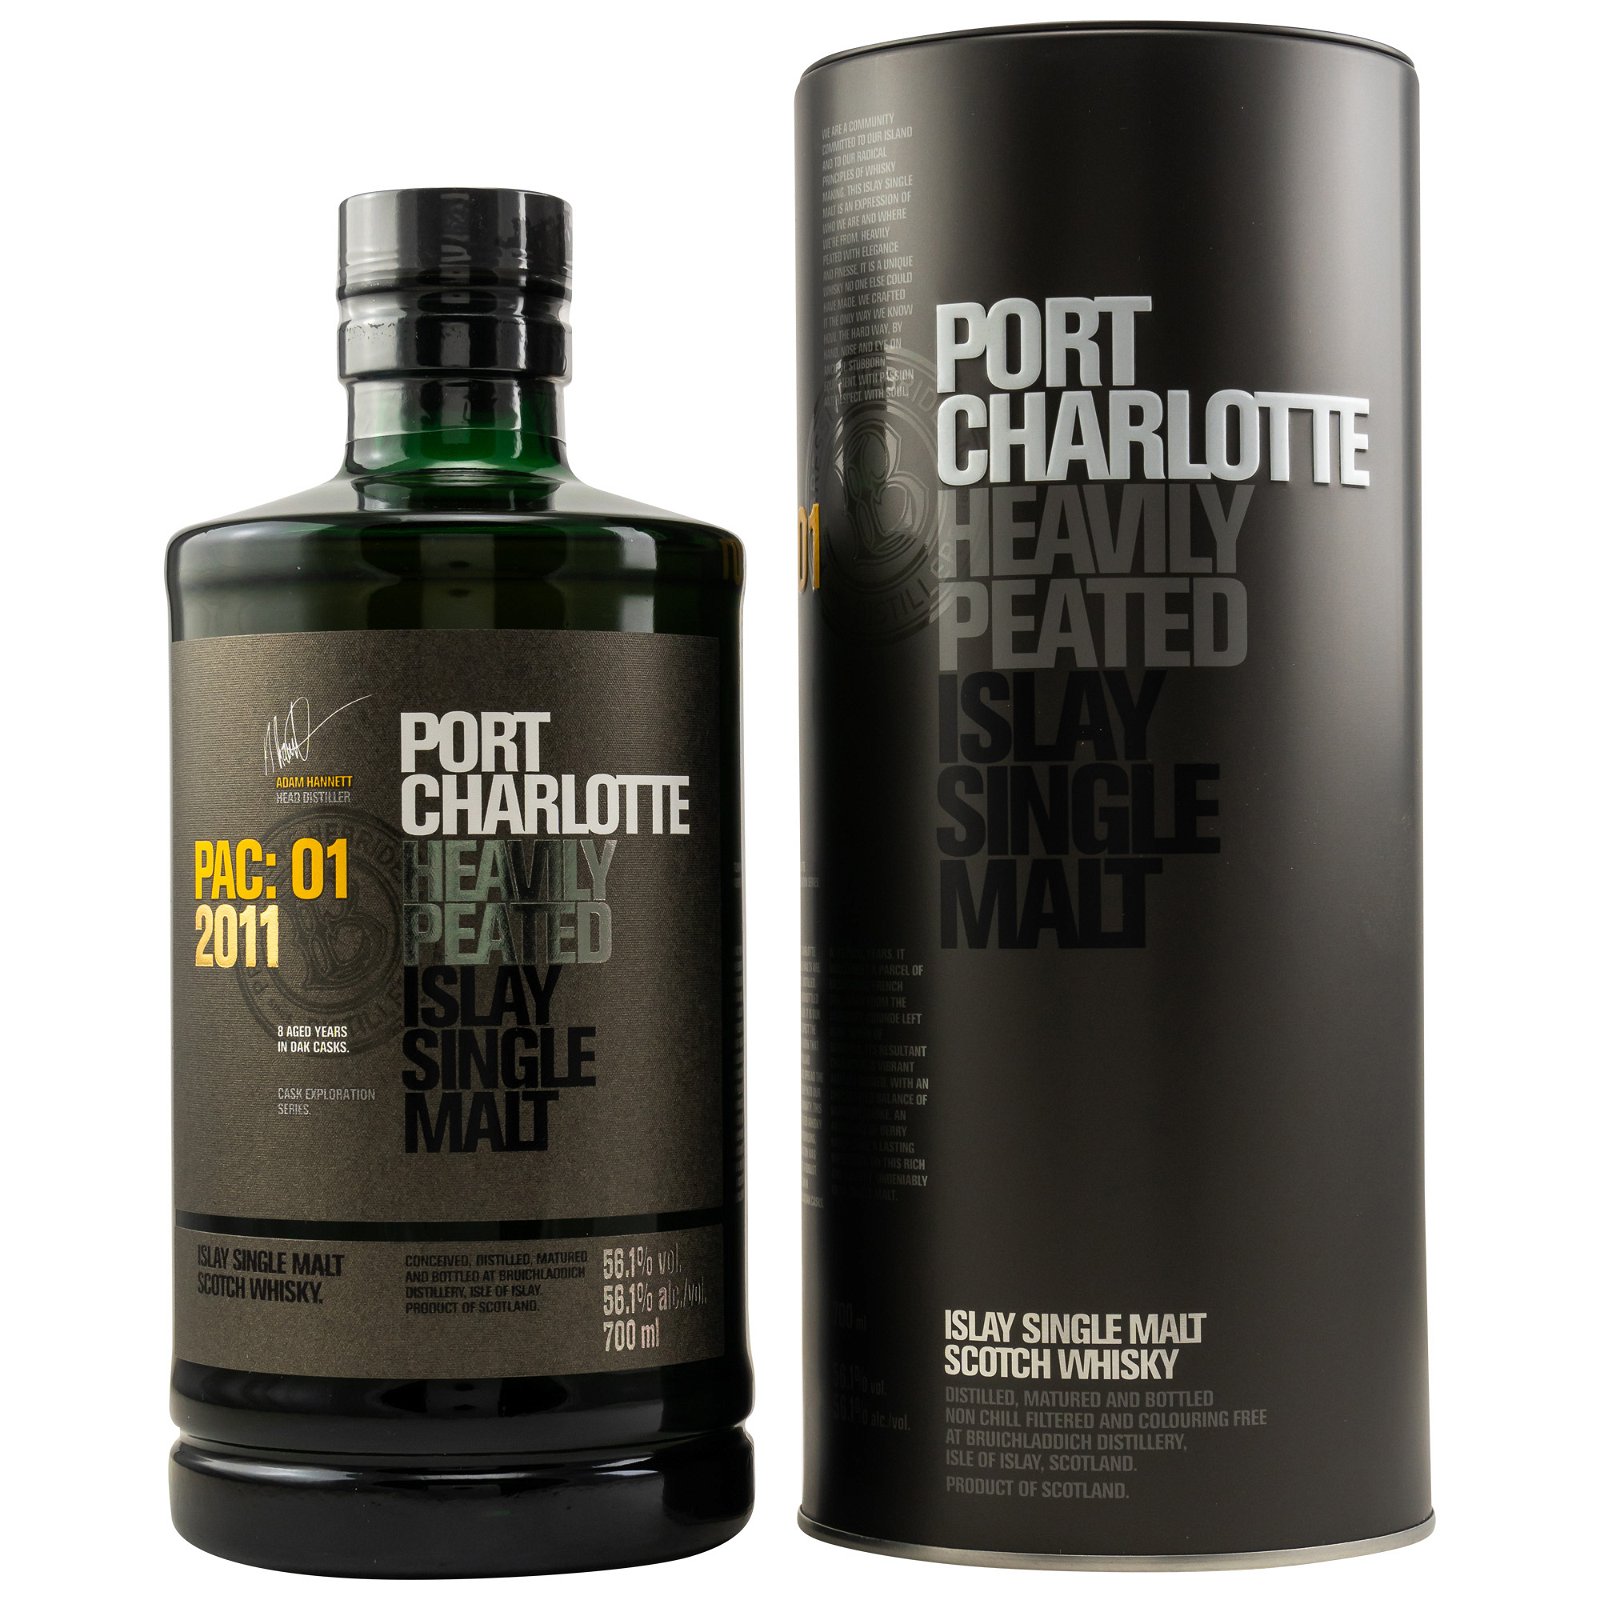 Port Charlotte 8 Jahre Heavily Peated PAC: 01 - 2011 (Cask Exploration Series)